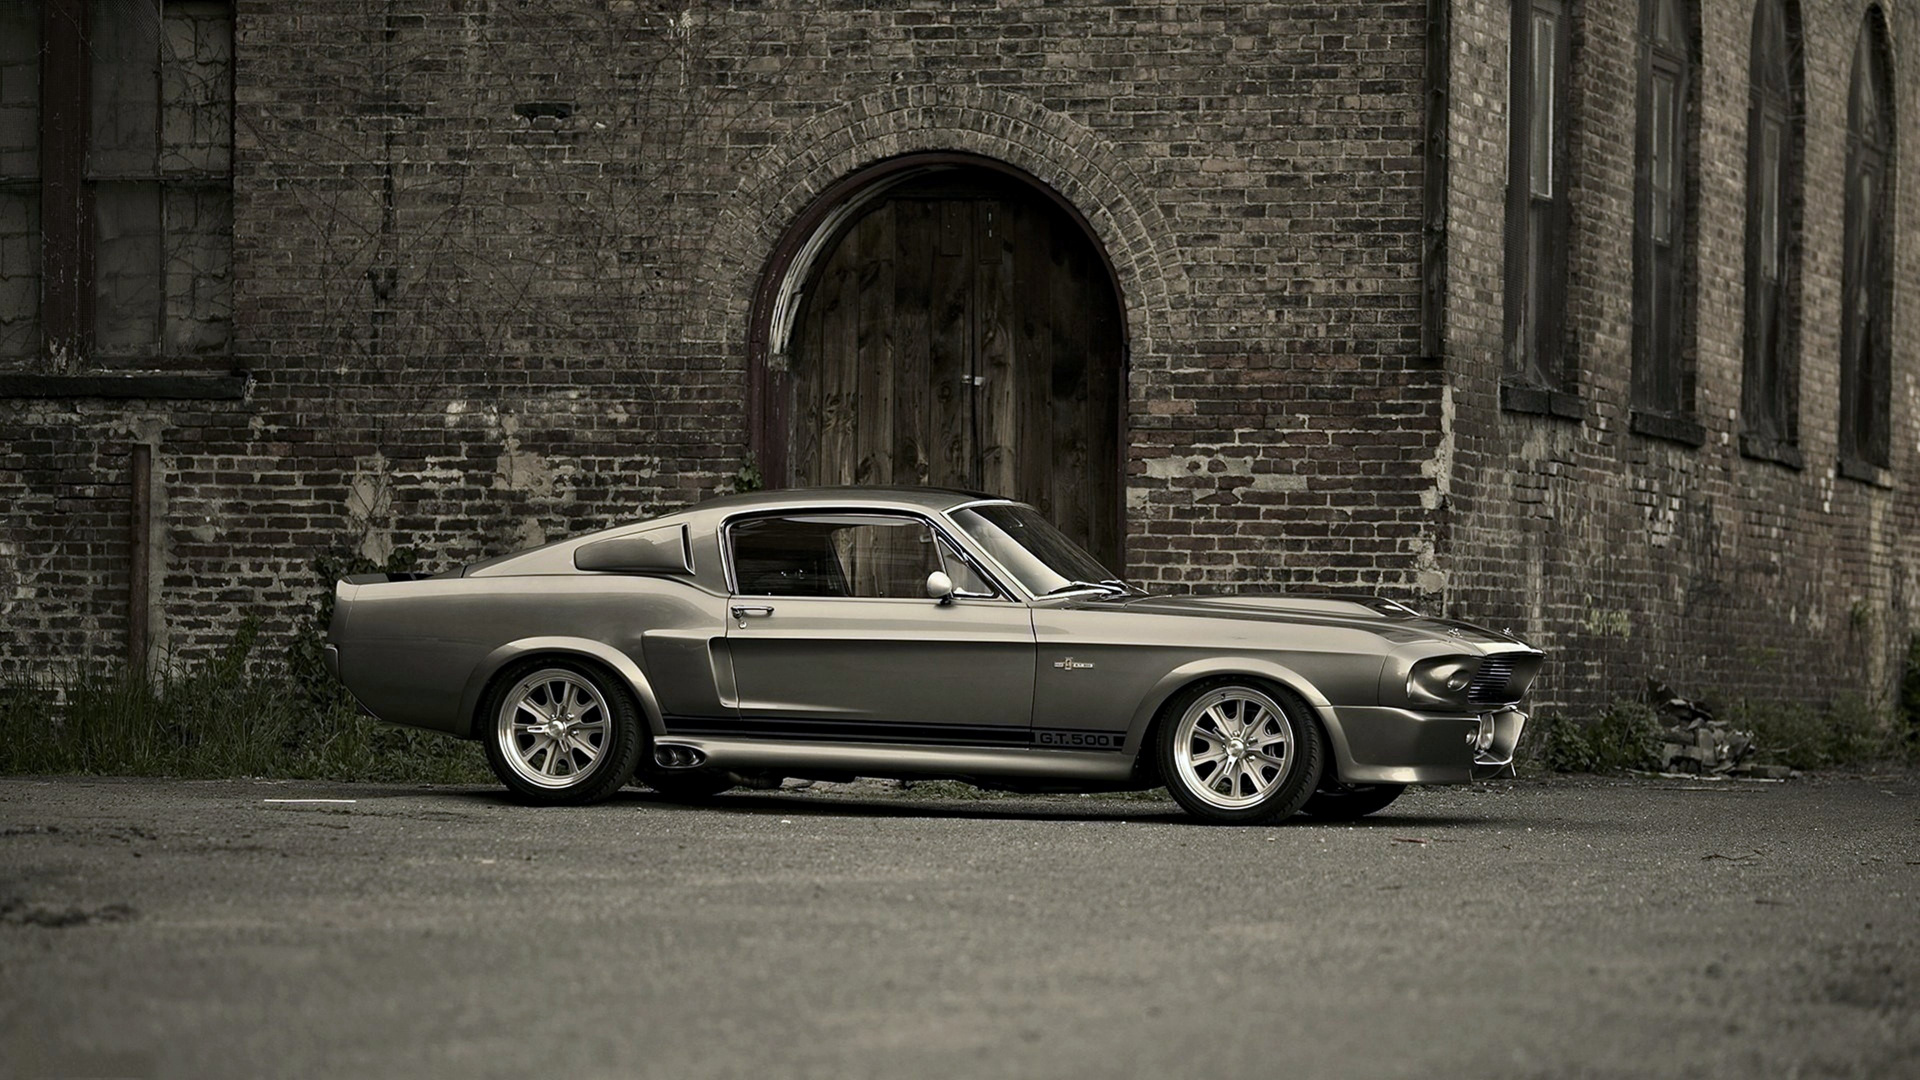 Grayscale Photo of Coupe Parked Beside Brick Wall. Wallpaper in 1920x1080 Resolution